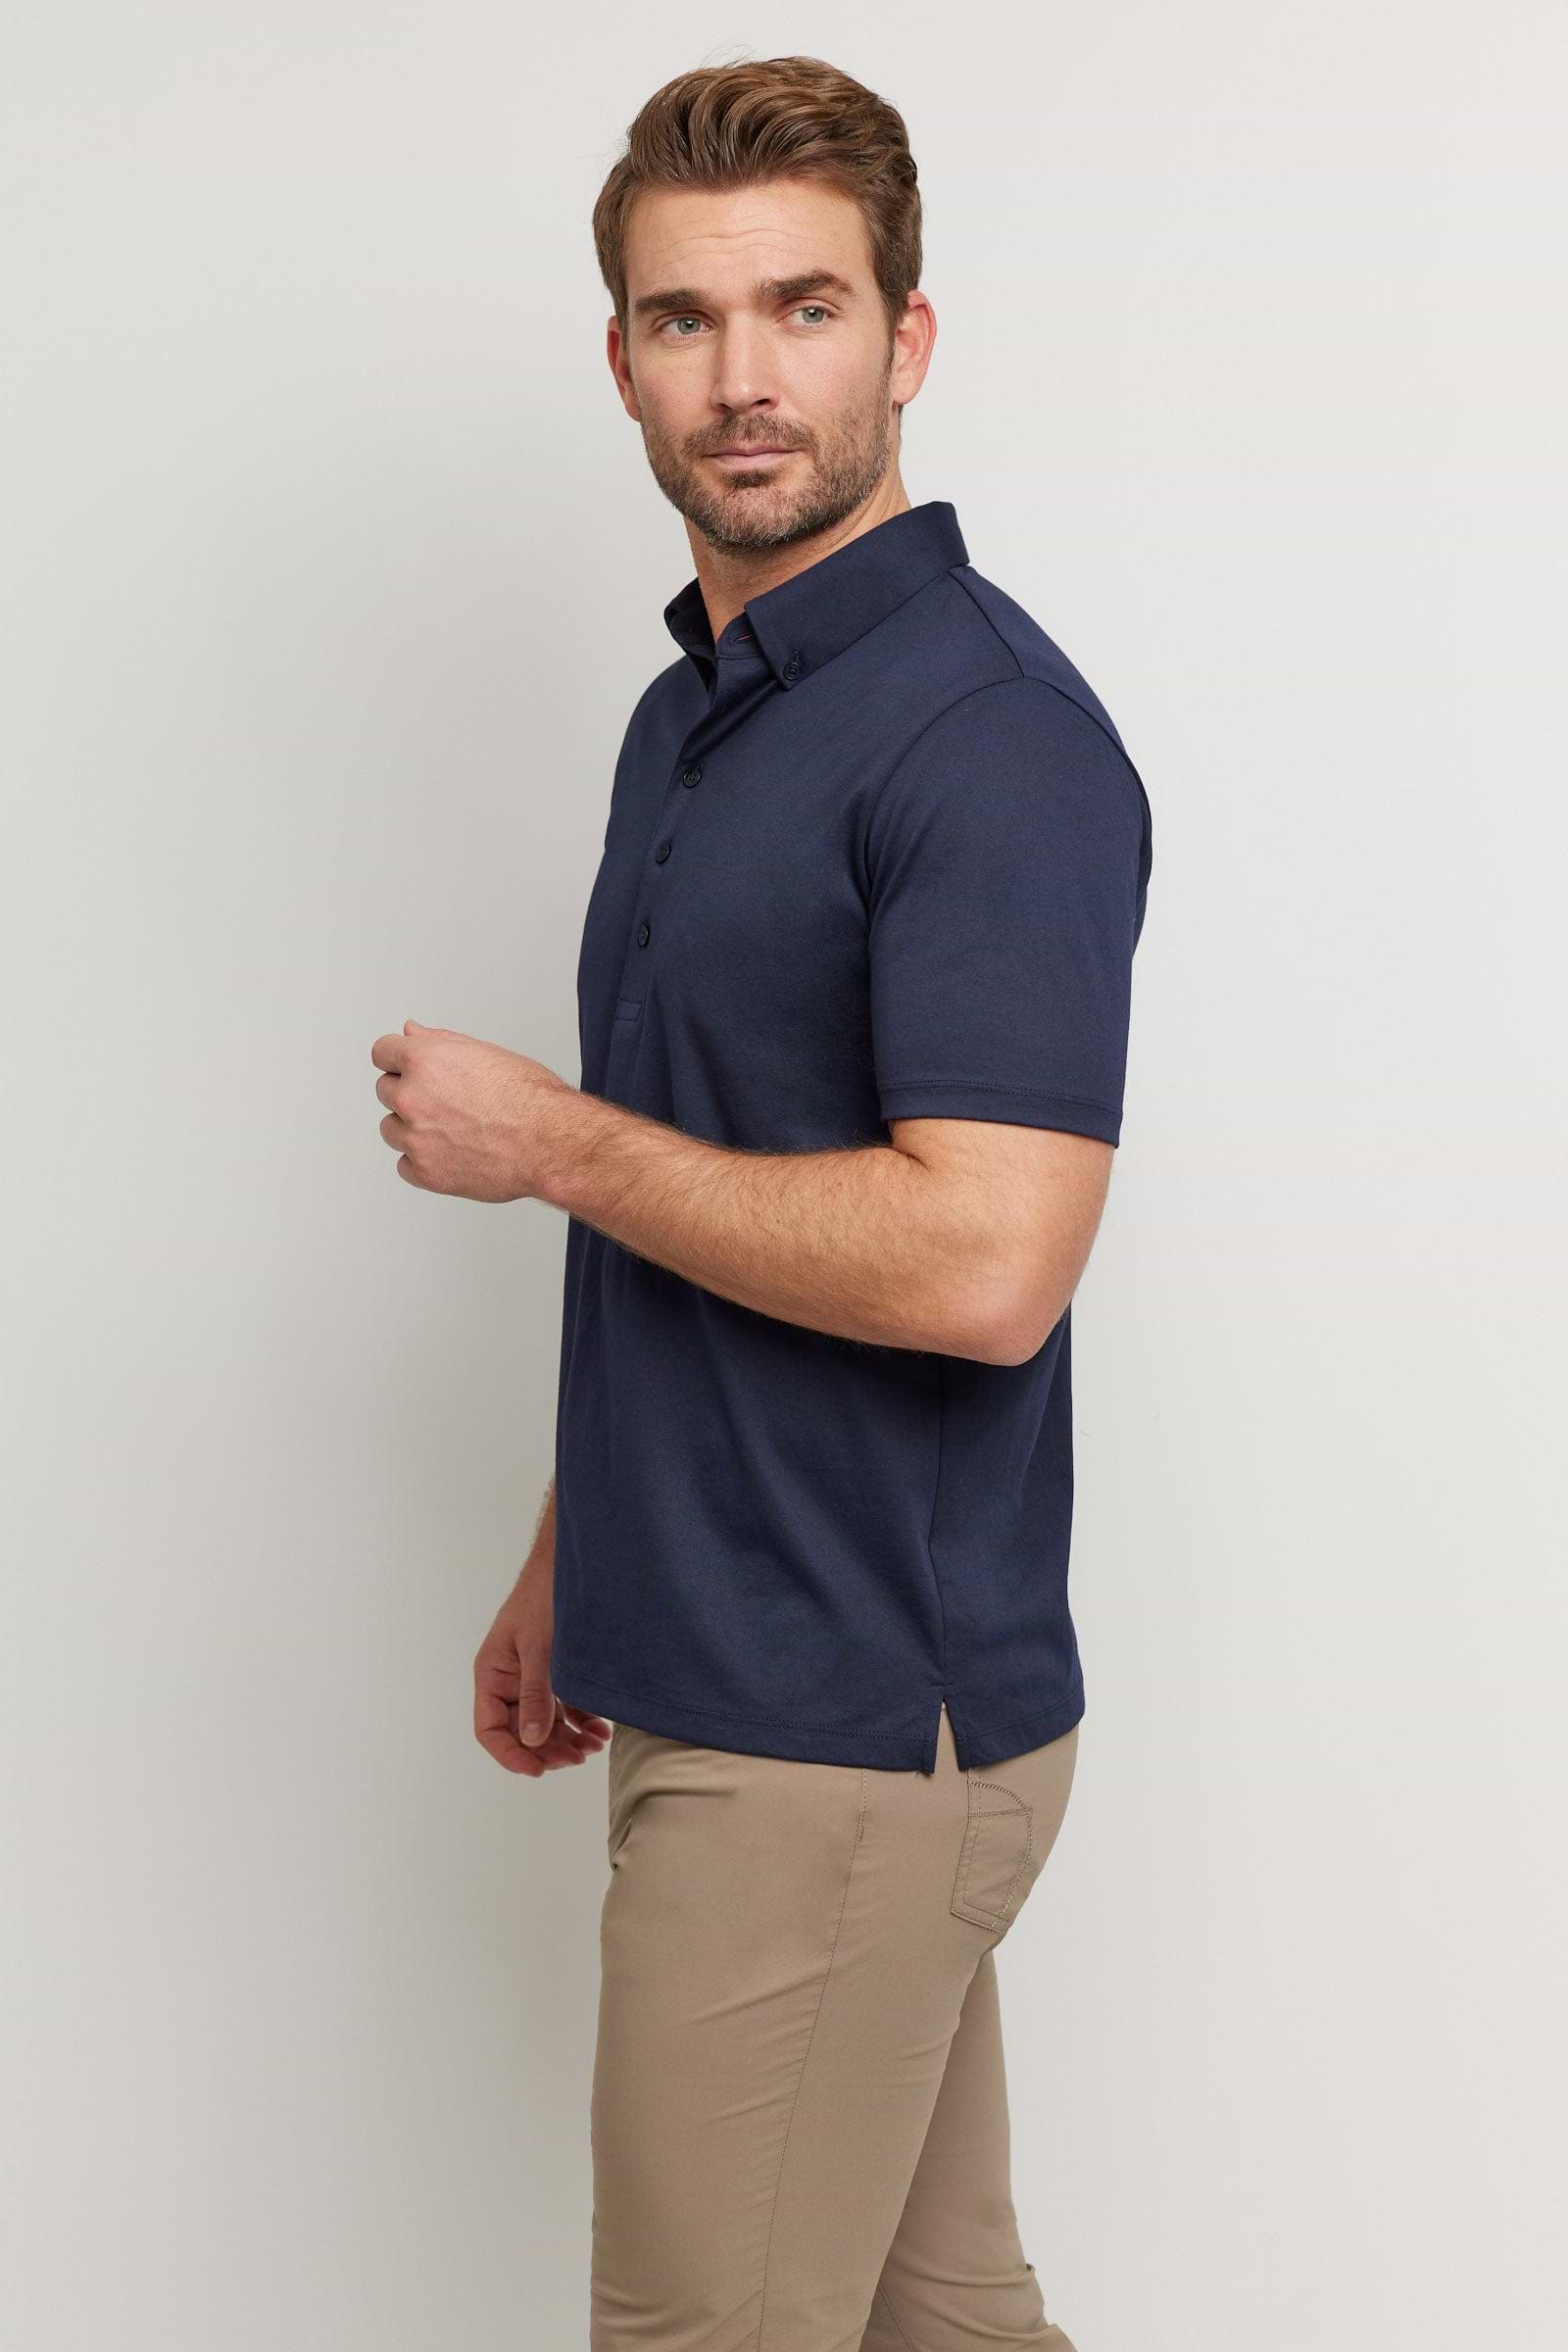 The Best Travel Top. Man Showing the Side Profile of a Men's Ryan Polo in Navy.